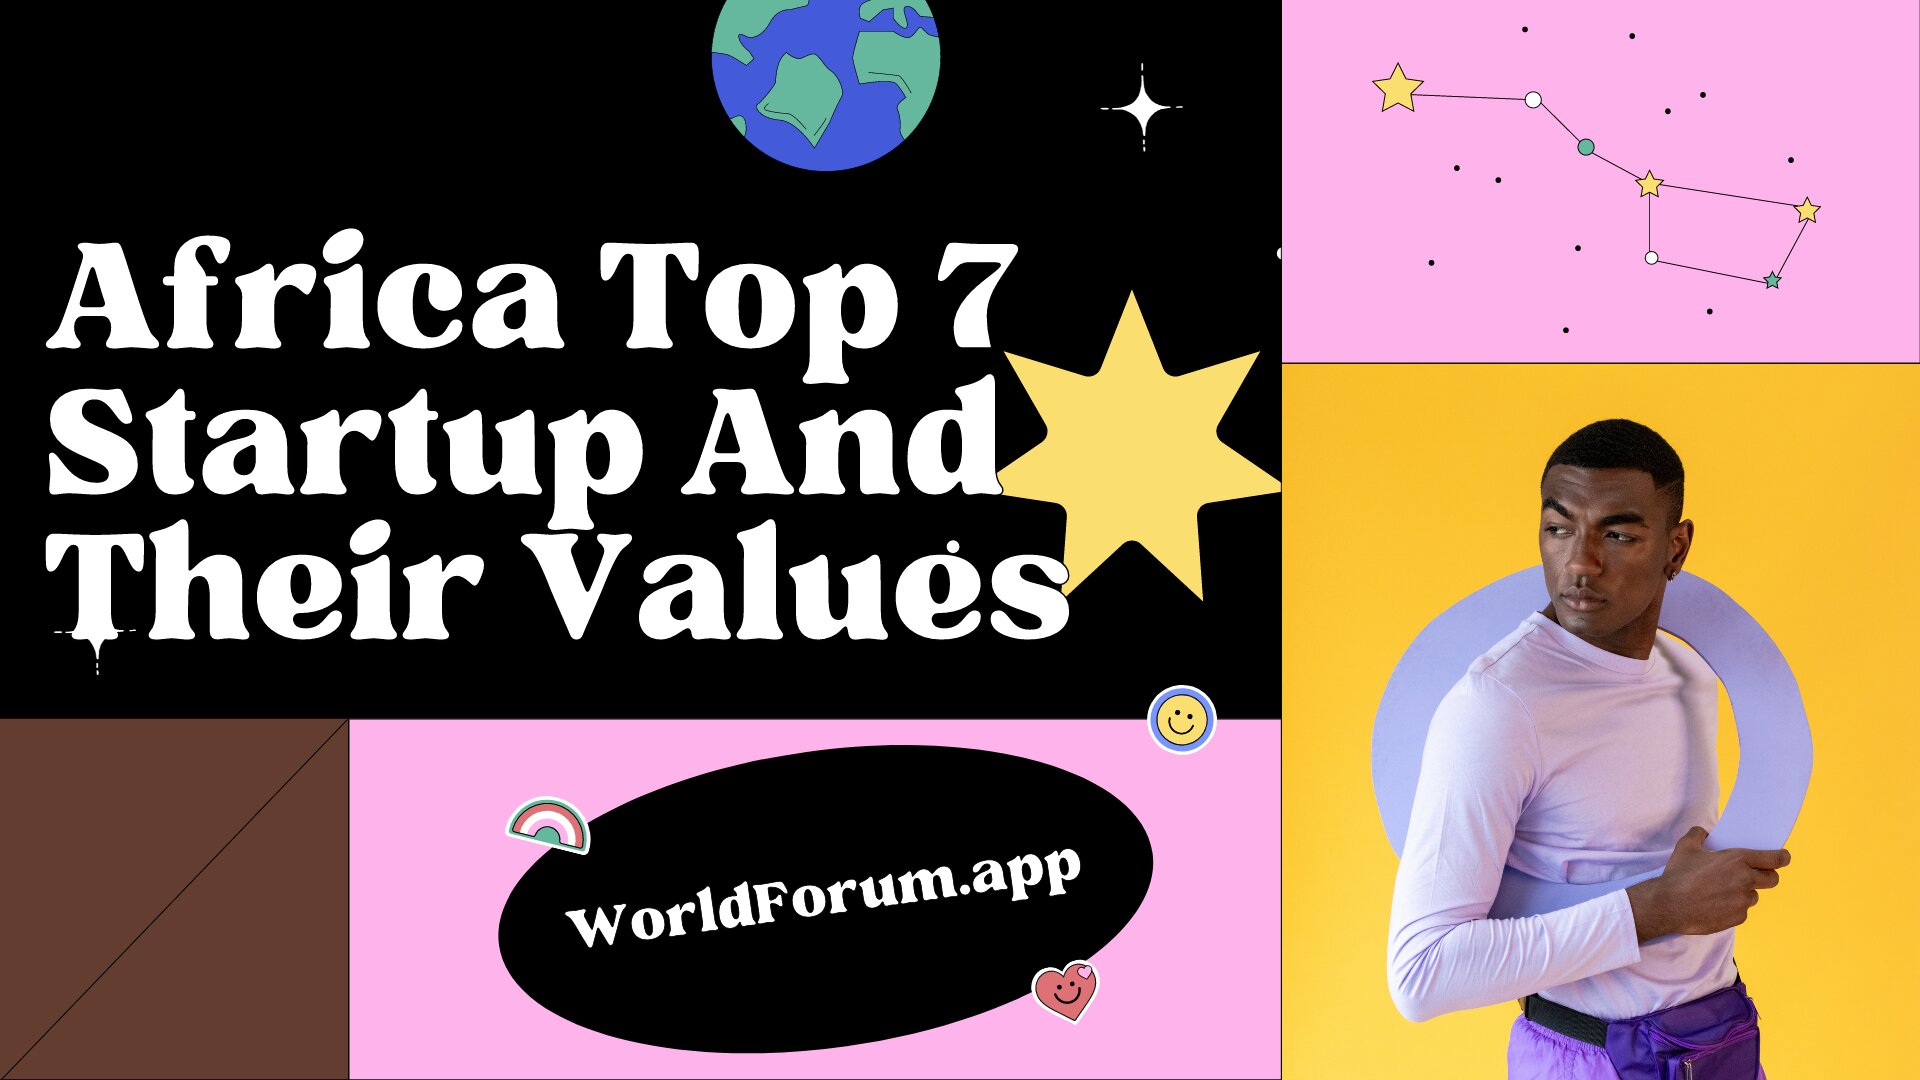 Africa Top 7 Startup And Their Values.jpg